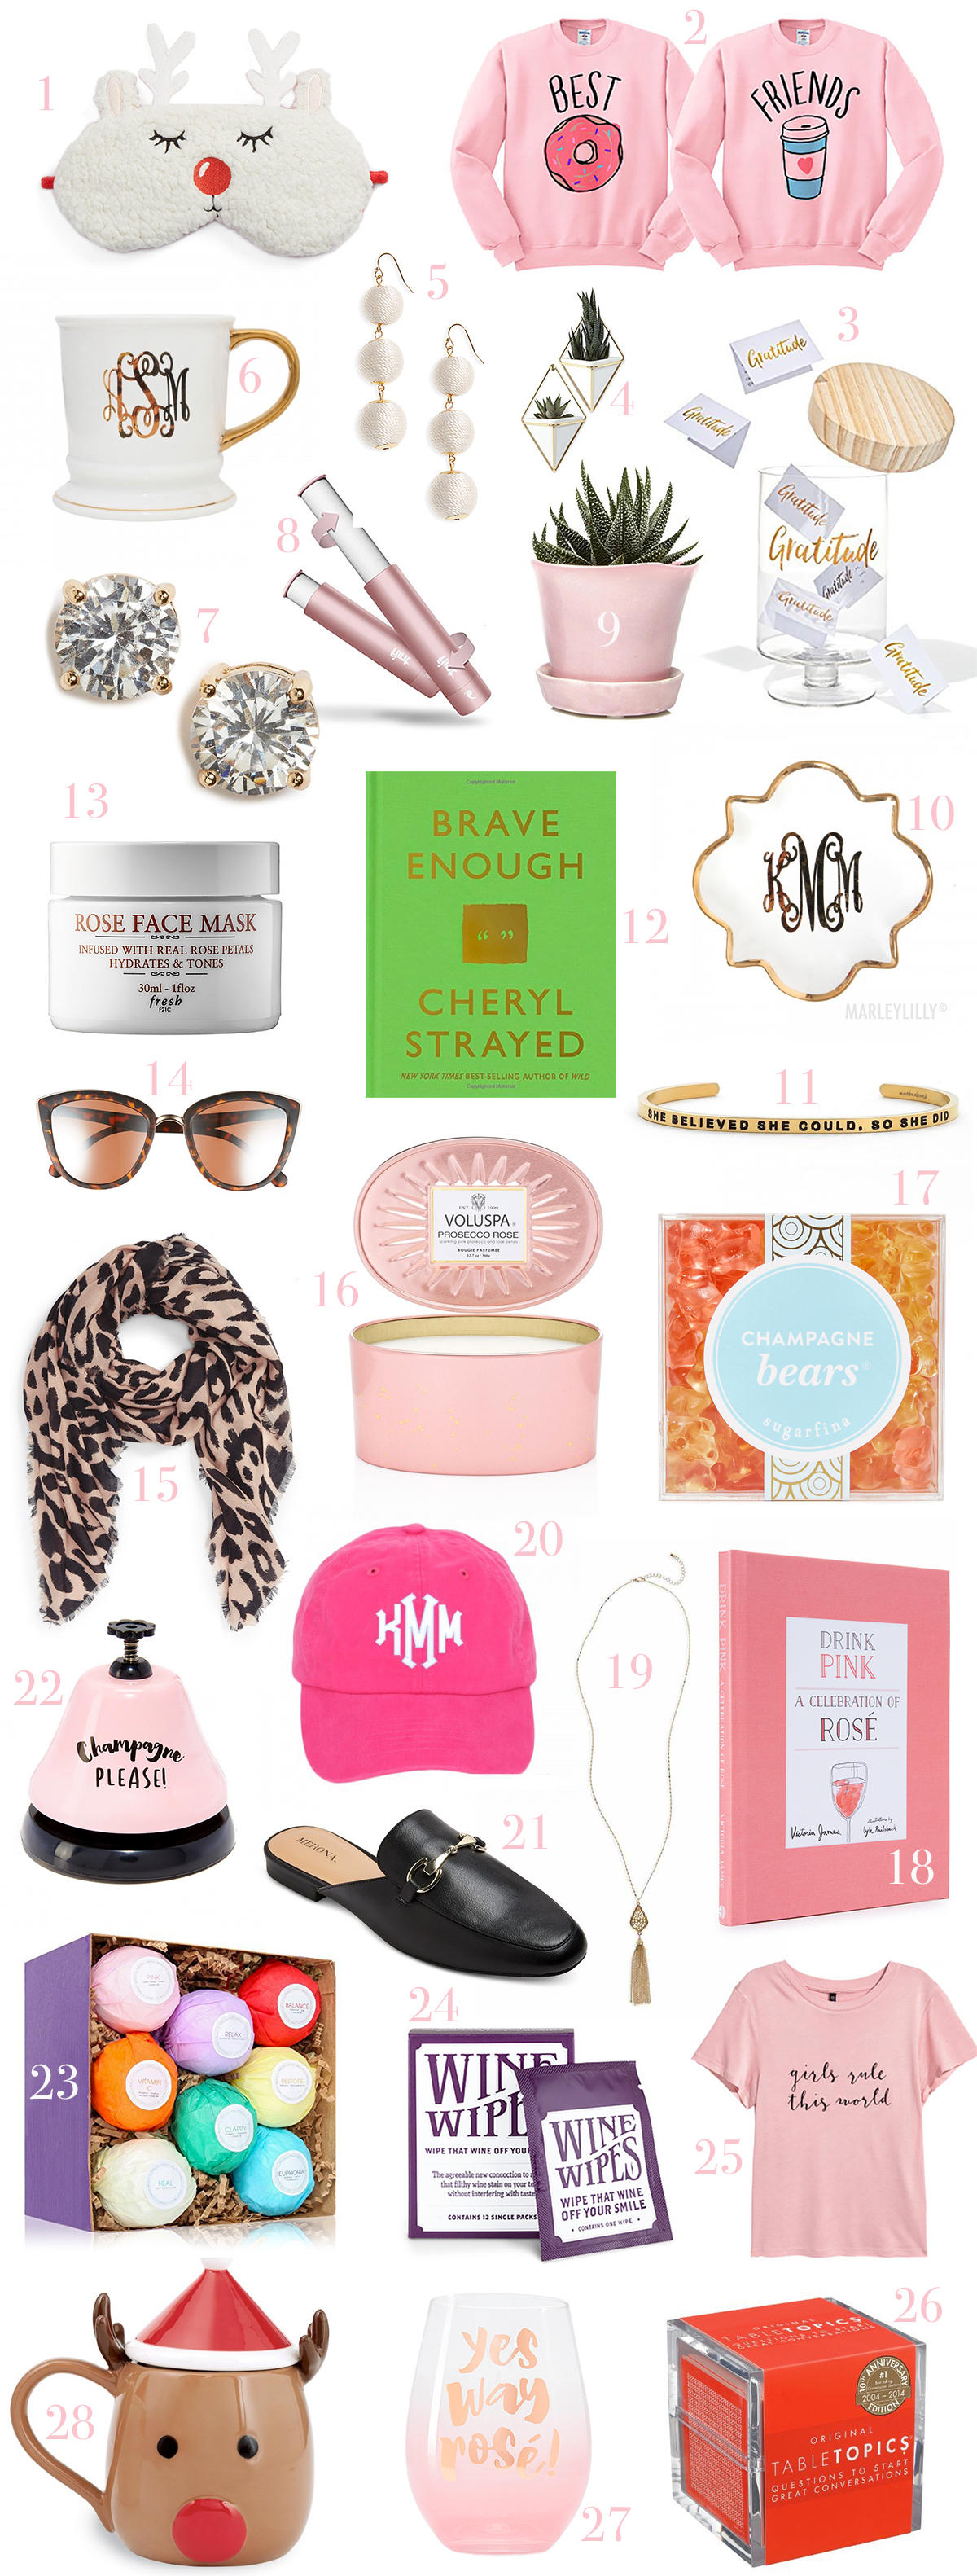 Gifts for Women under 25: 28 Affordable Christmas Gift Ideas for Her